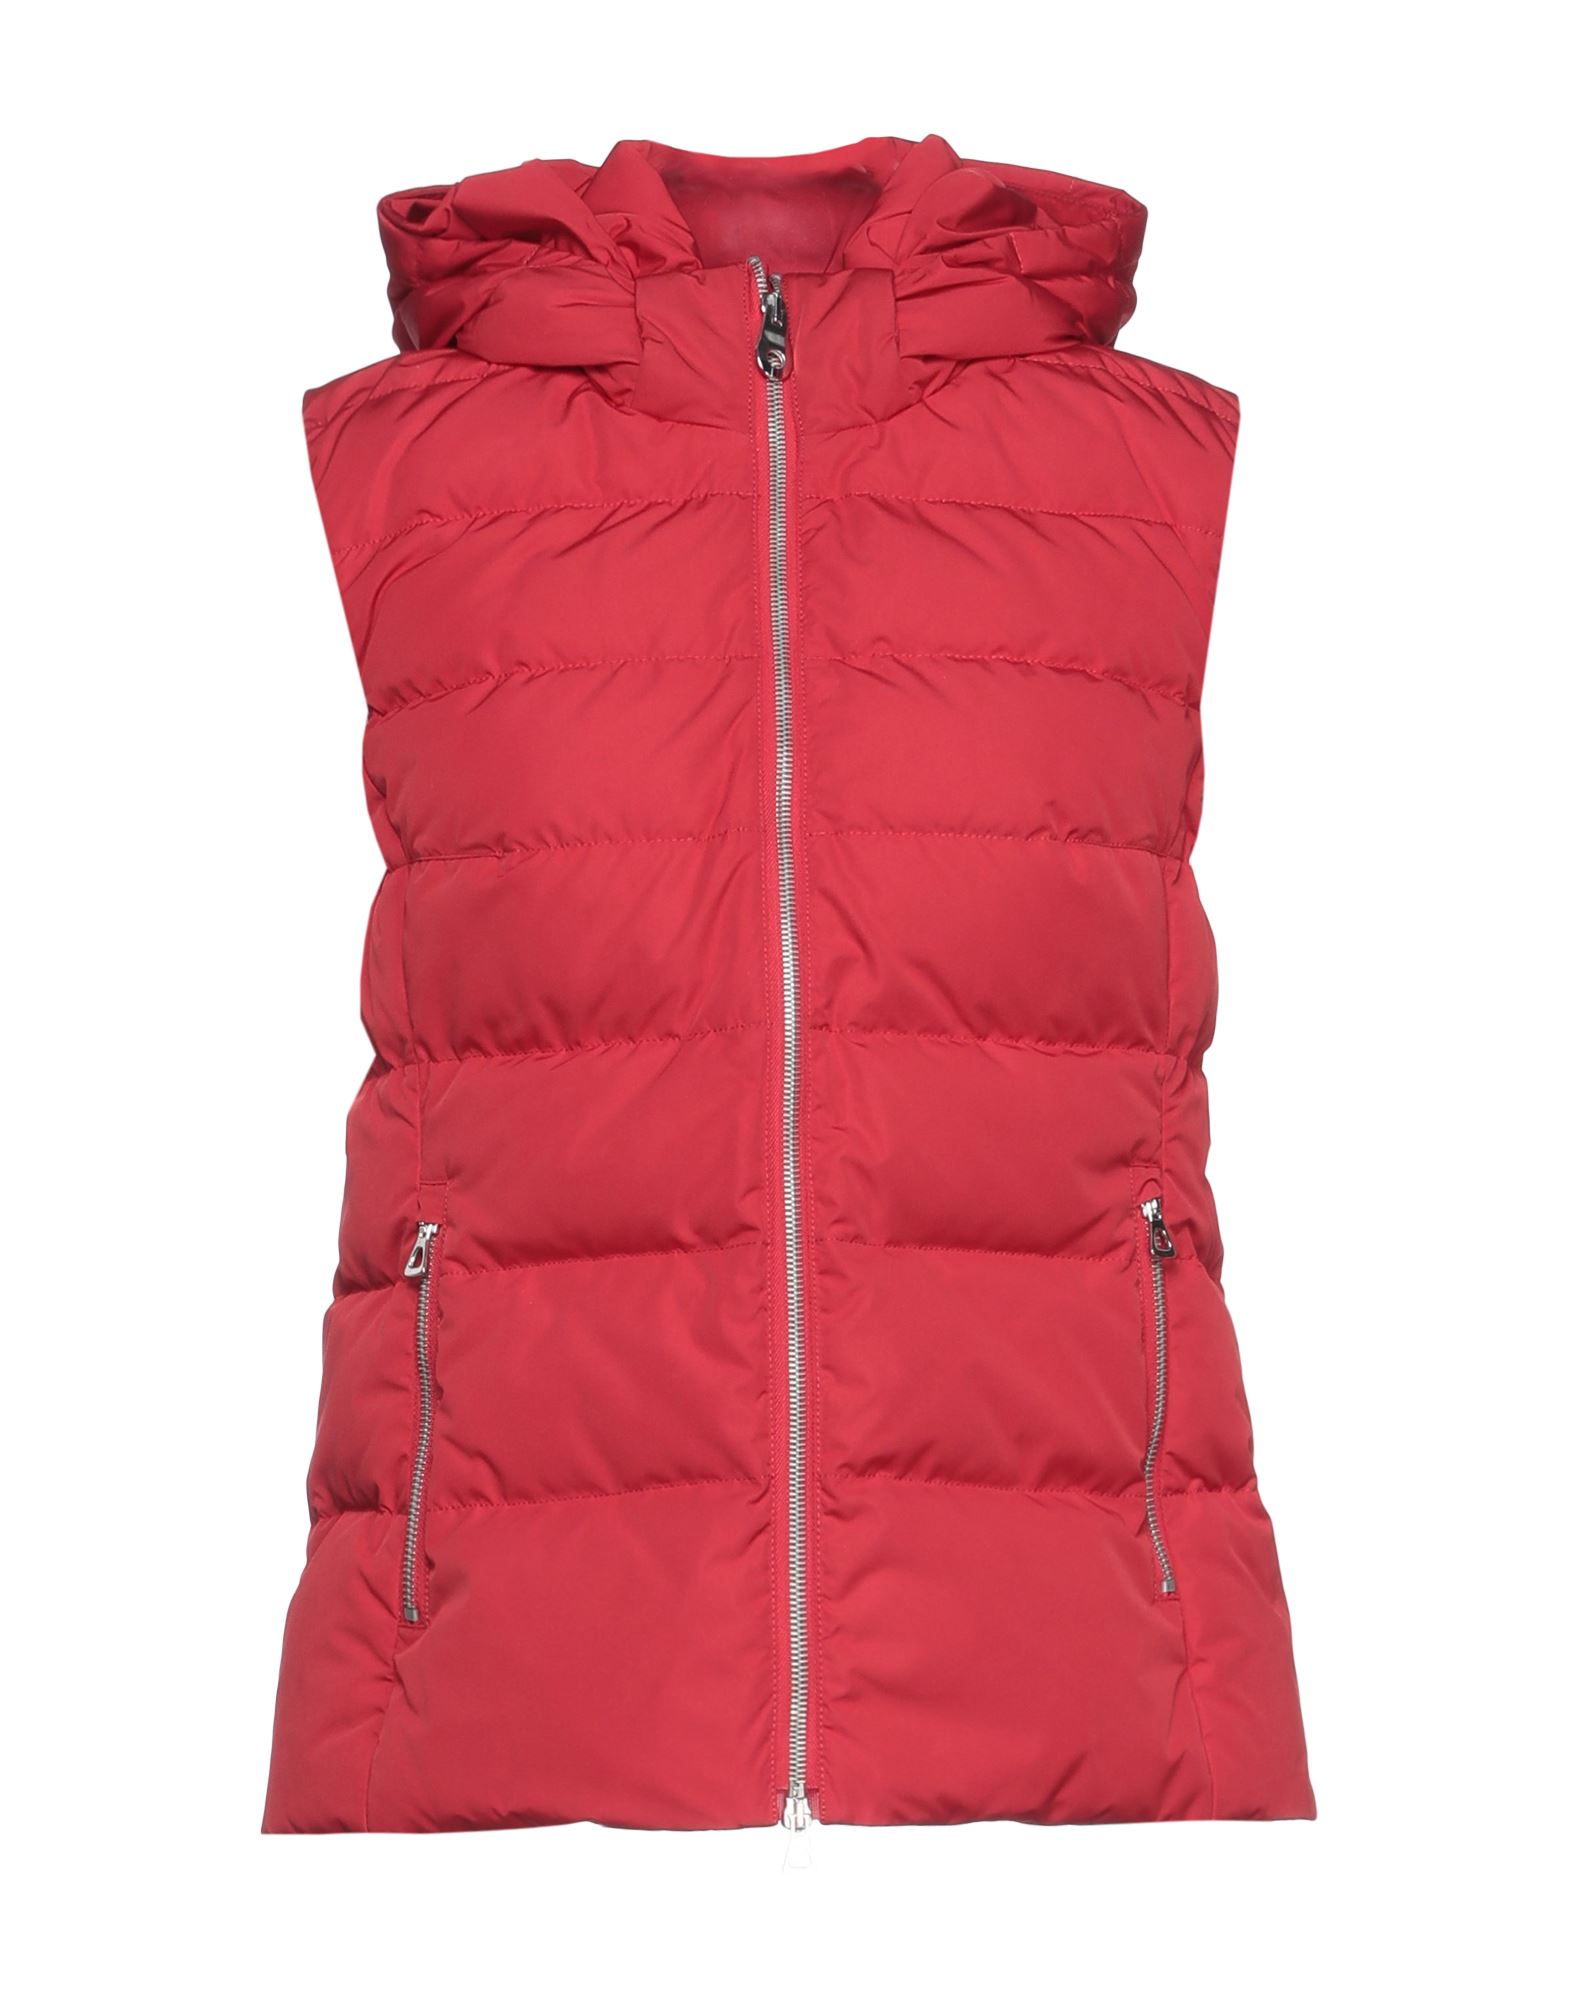 Historic Down Jackets In Red